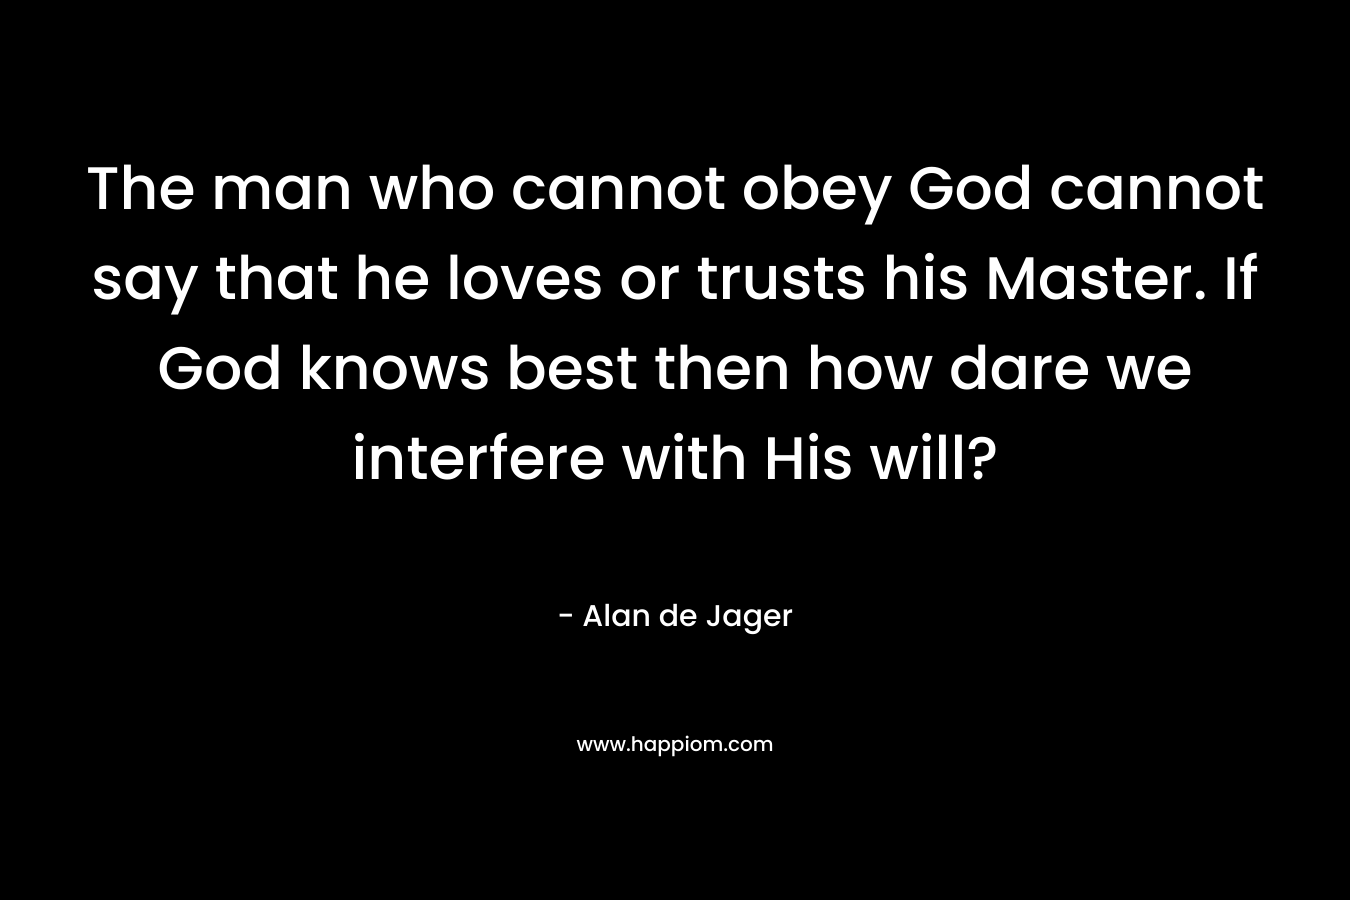 The man who cannot obey God cannot say that he loves or trusts his Master. If God knows best then how dare we interfere with His will? – Alan de Jager